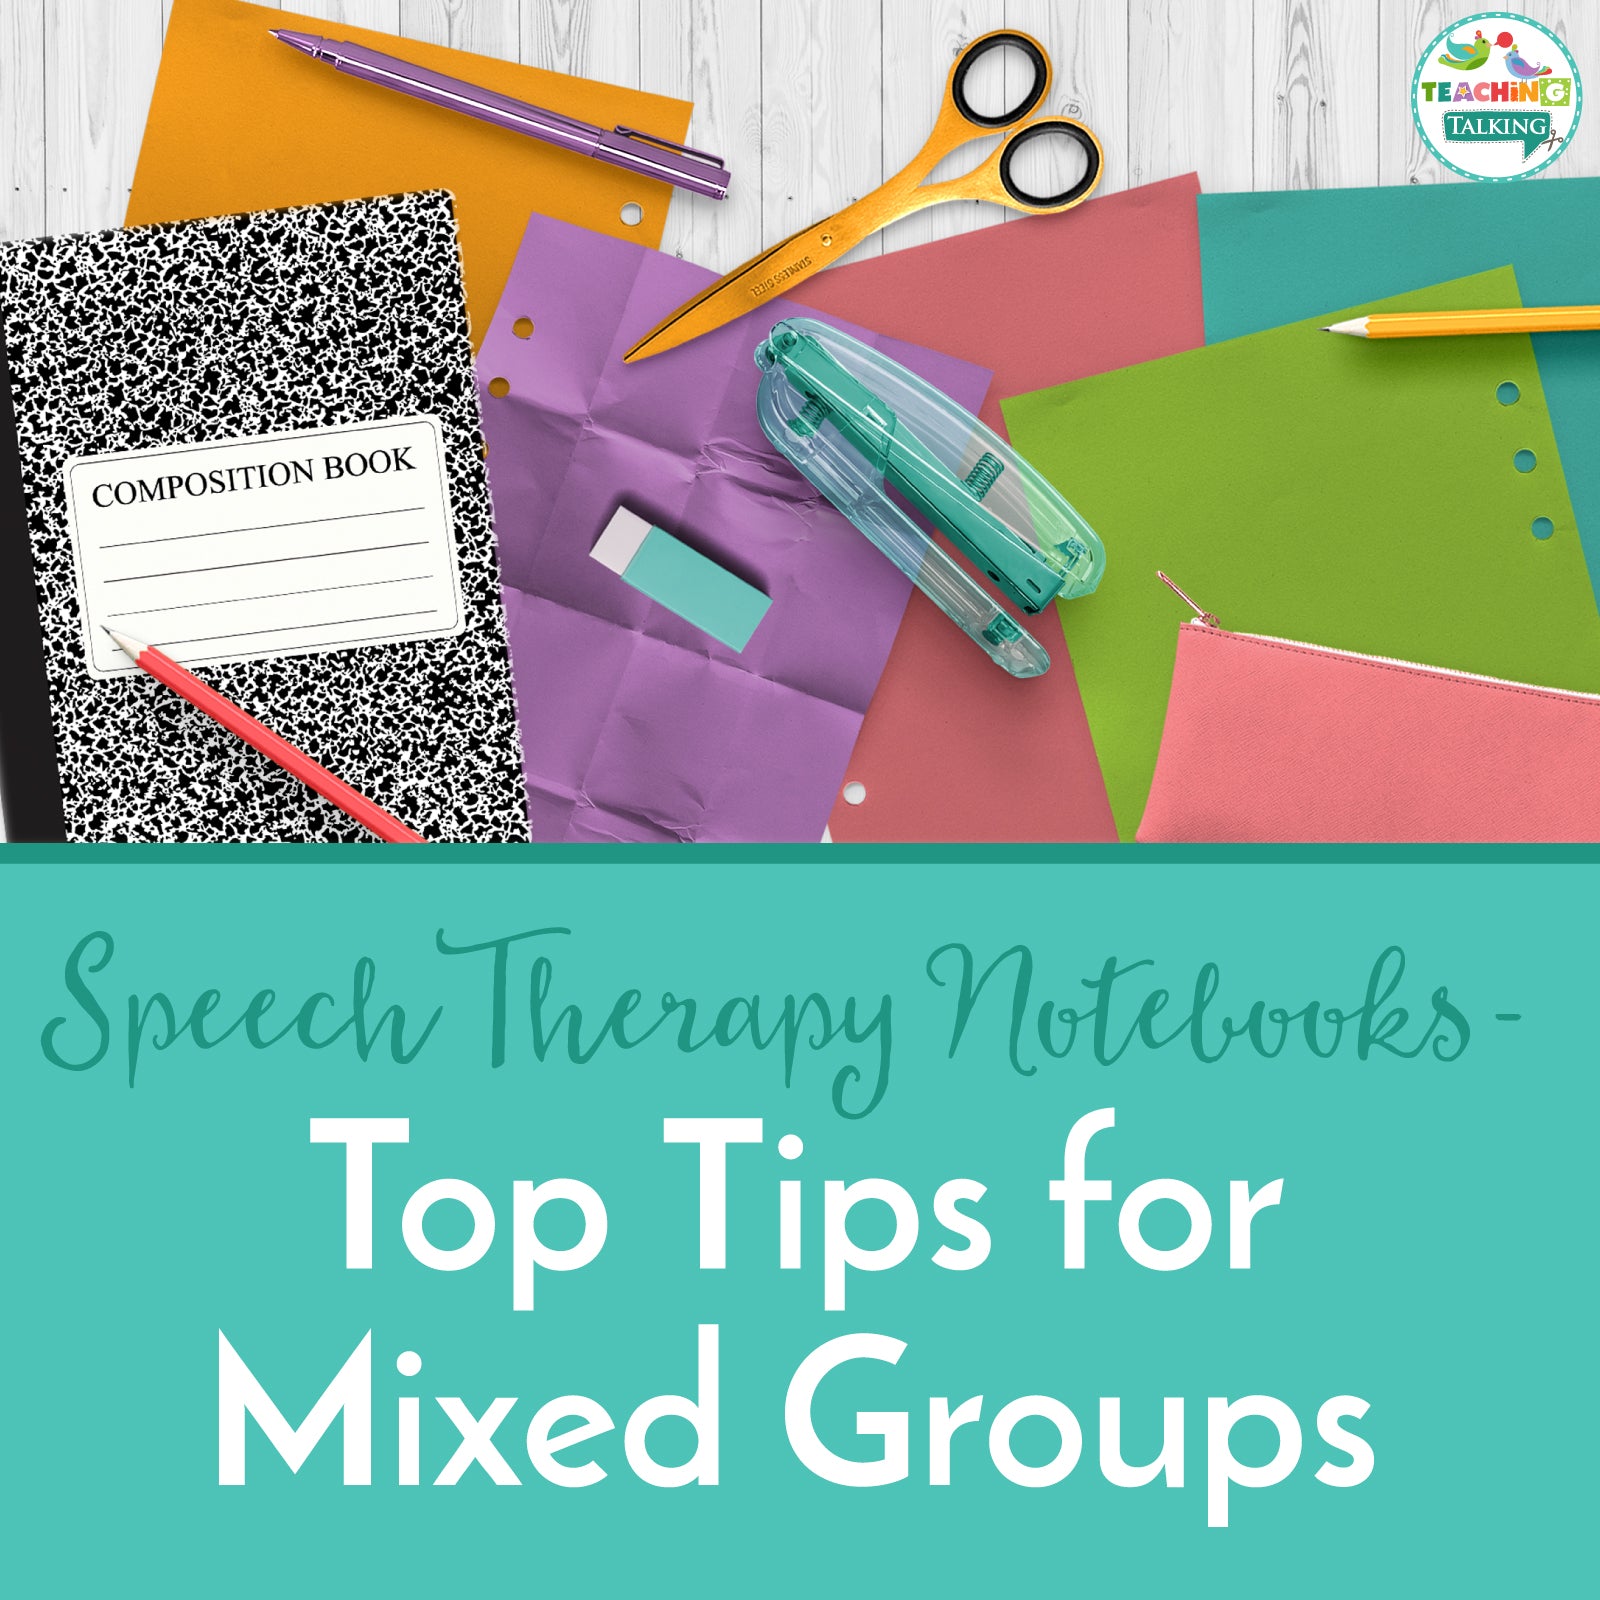 Speech therapy notebooks with mixed groups